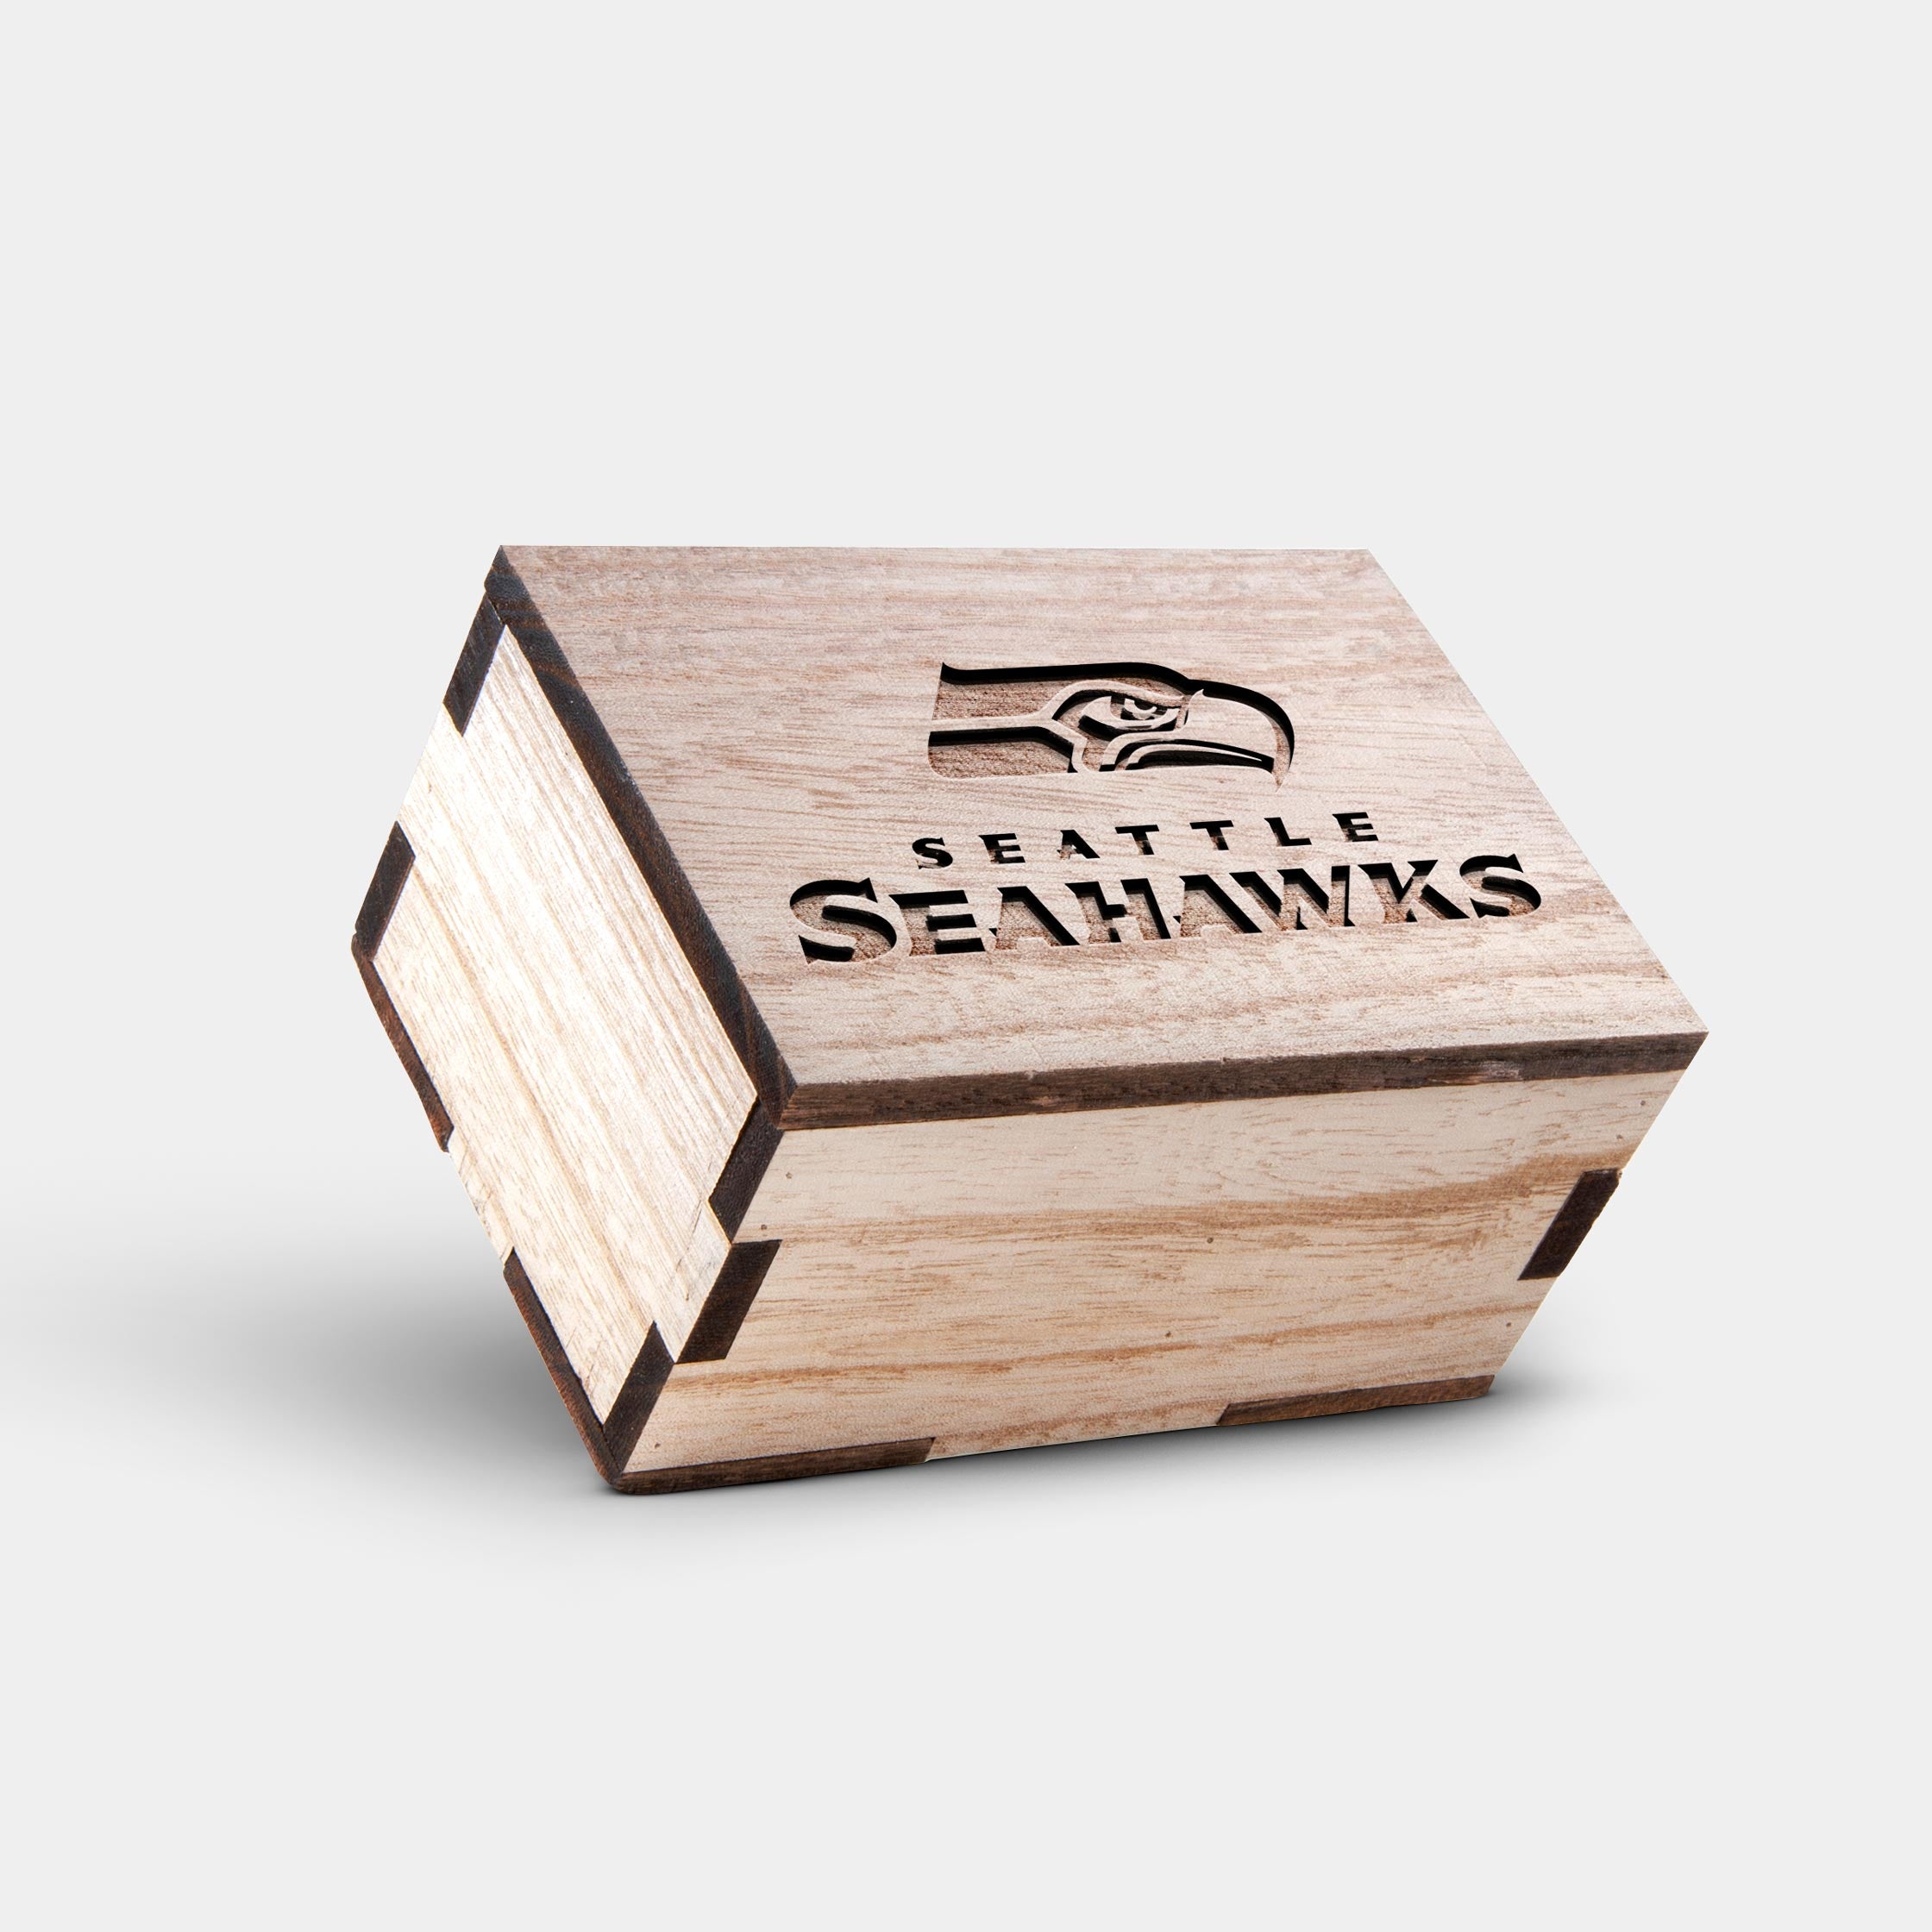 Best Seattle Seahawks Mahogany And Walnut Wood Chronograph Watch - Engraved In Nature